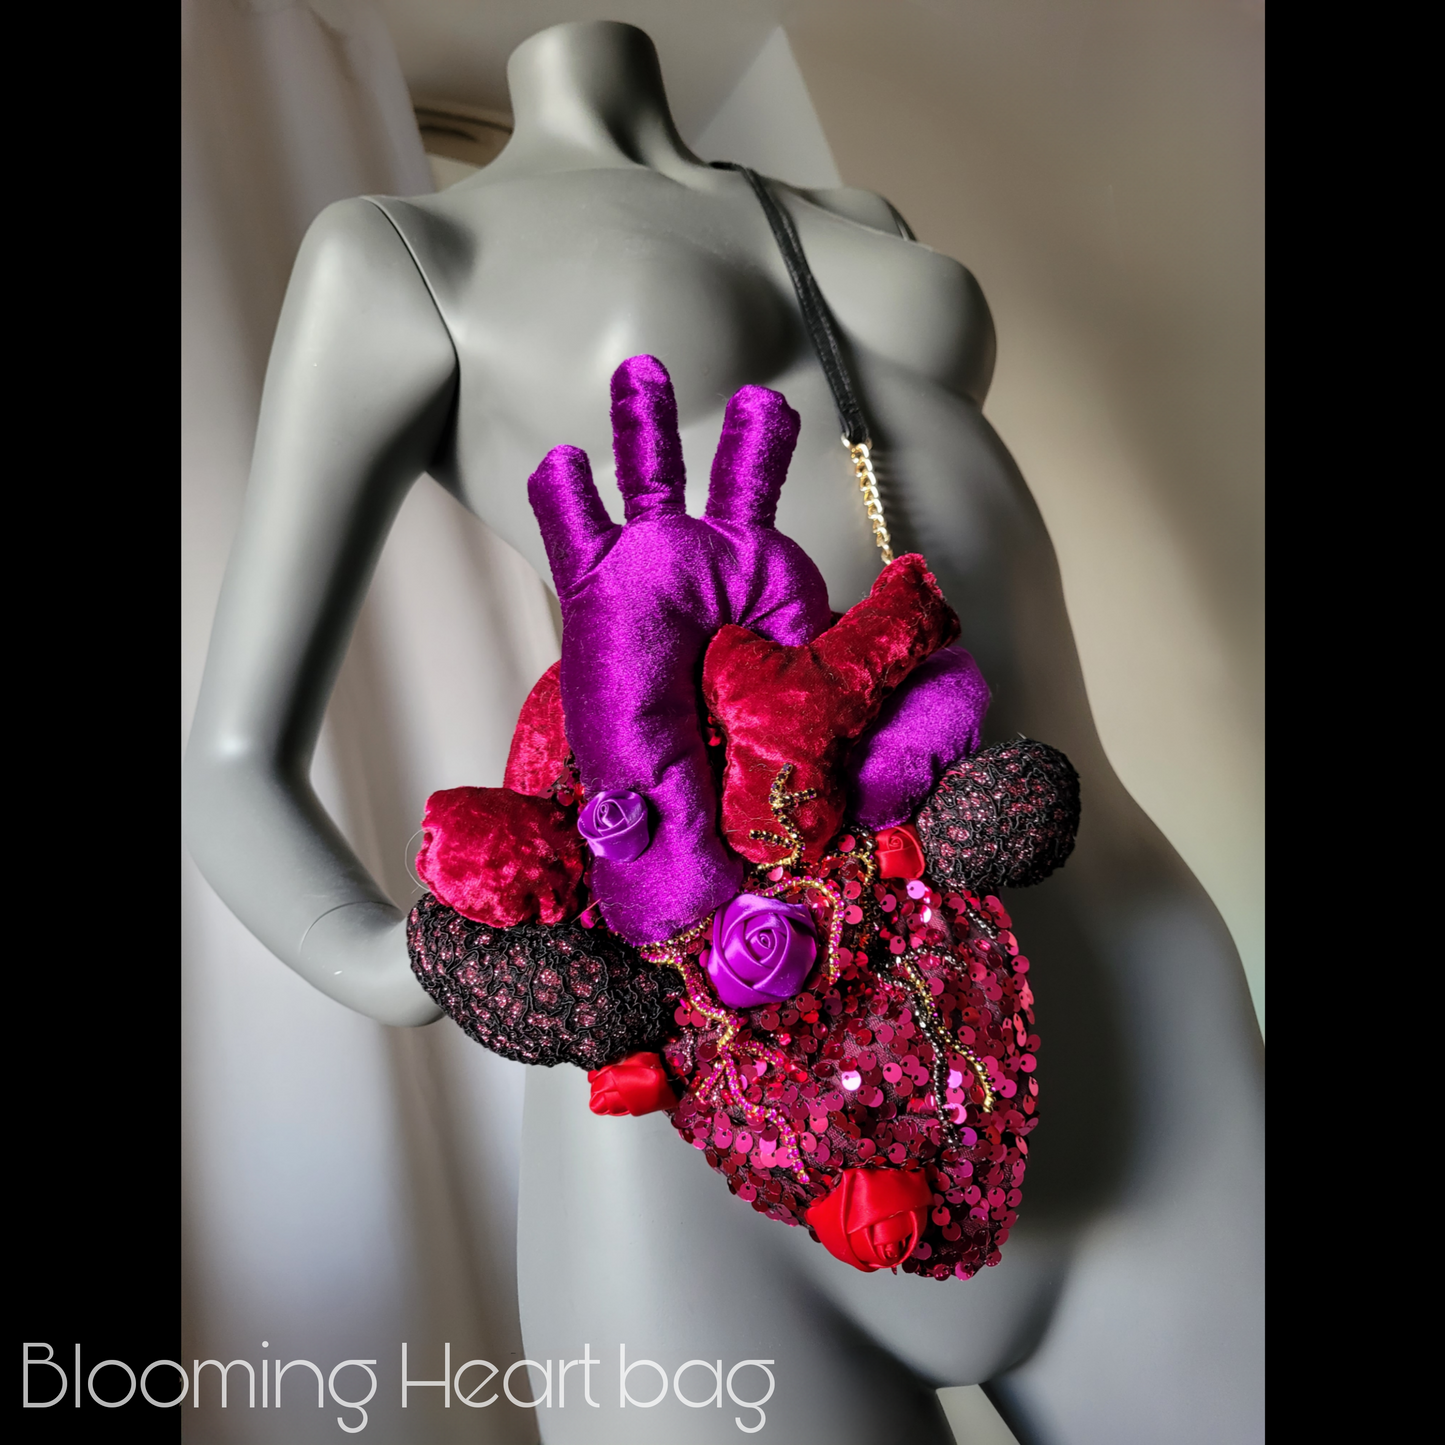 The Blooming Heart bag